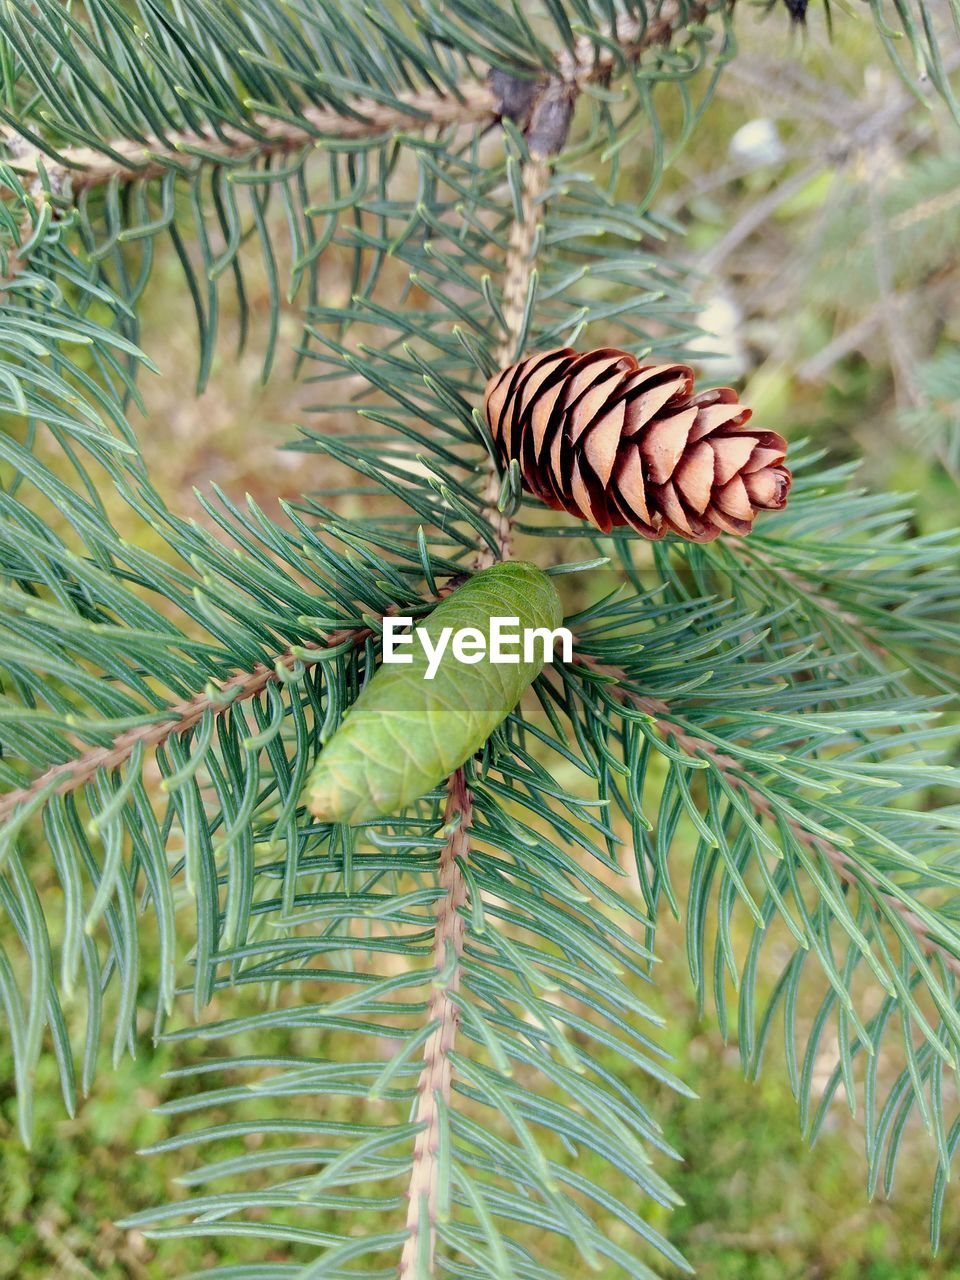 CLOSE-UP OF BUTTERFLY ON PINE TREE